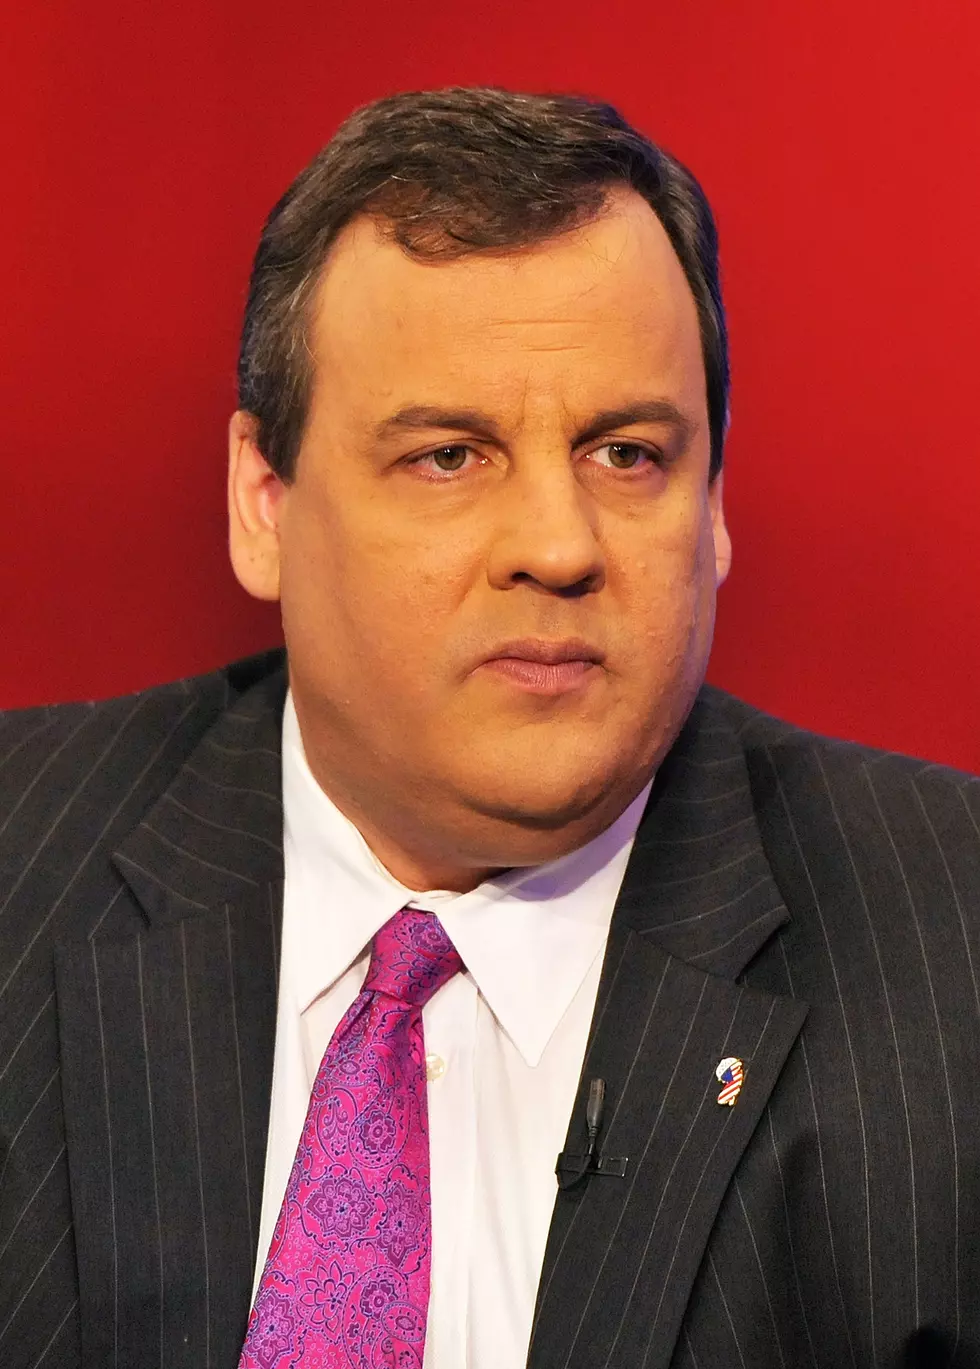 Suprise! Chris Christie Isn&#8217;t Running for President, Should America Suspend Elections? and More in Chad&#8217;s Steaming Pile